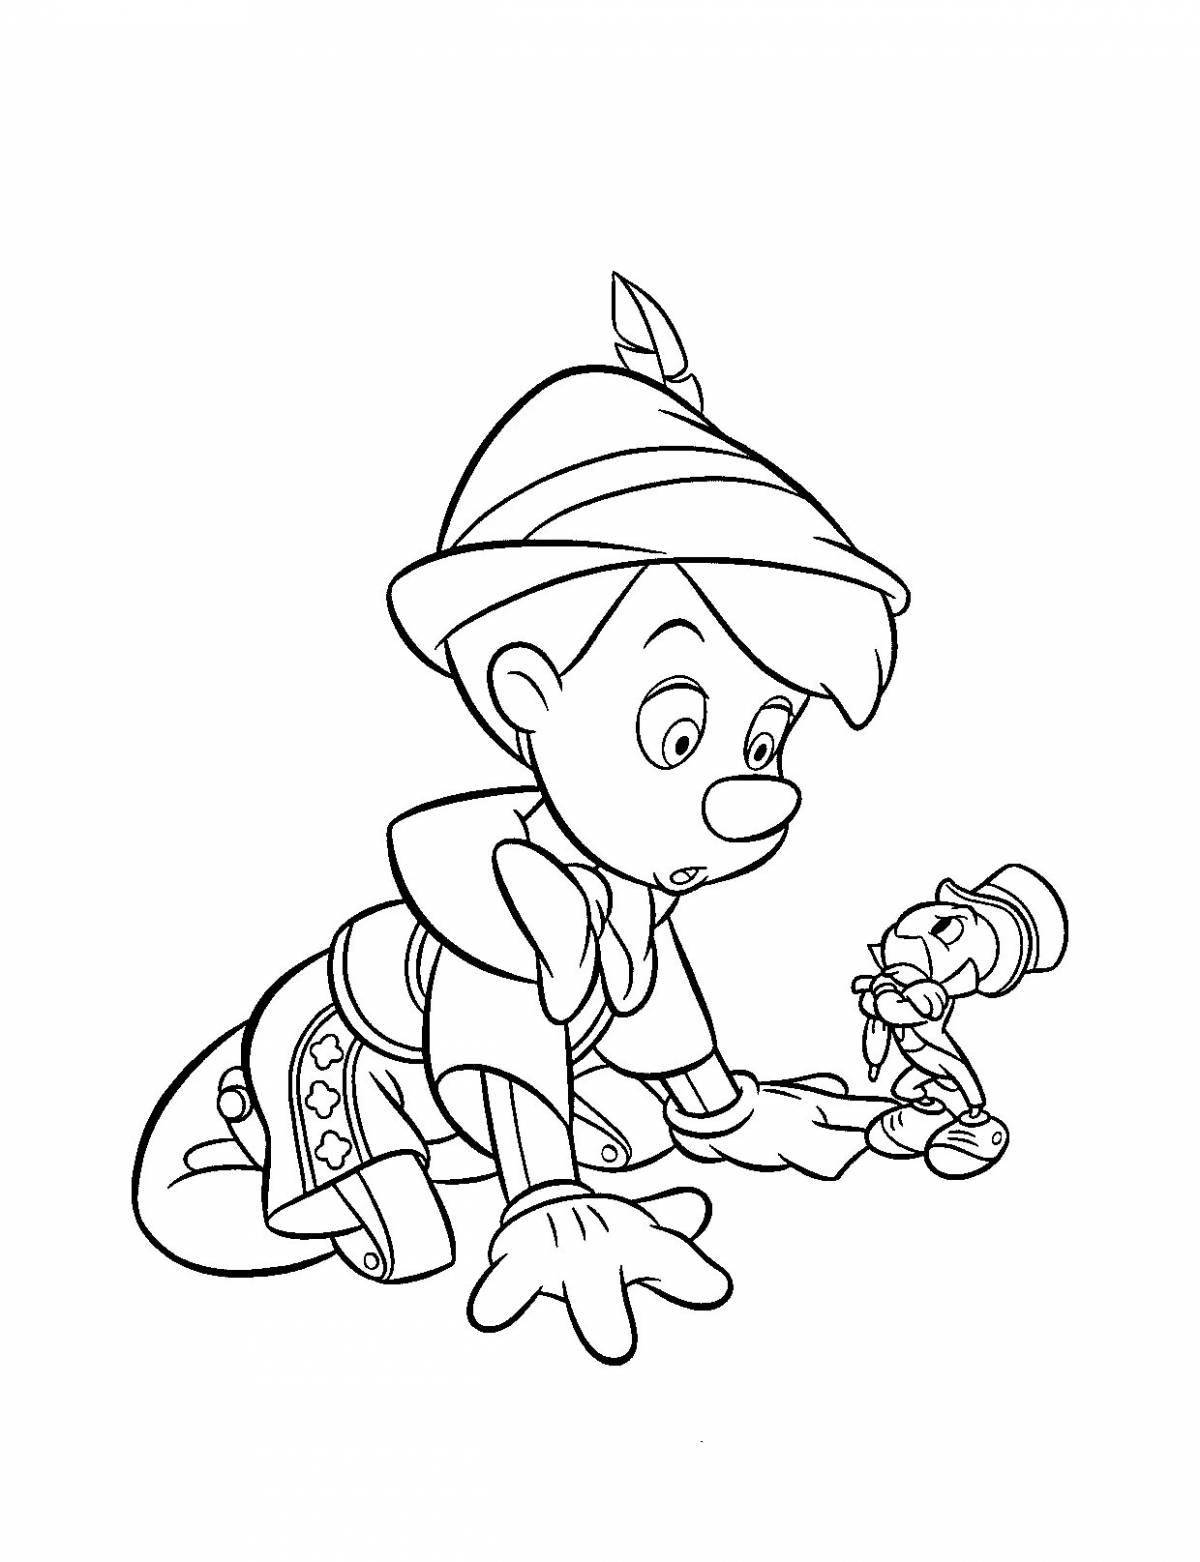 Color-explosion pinocchio coloring page for kids